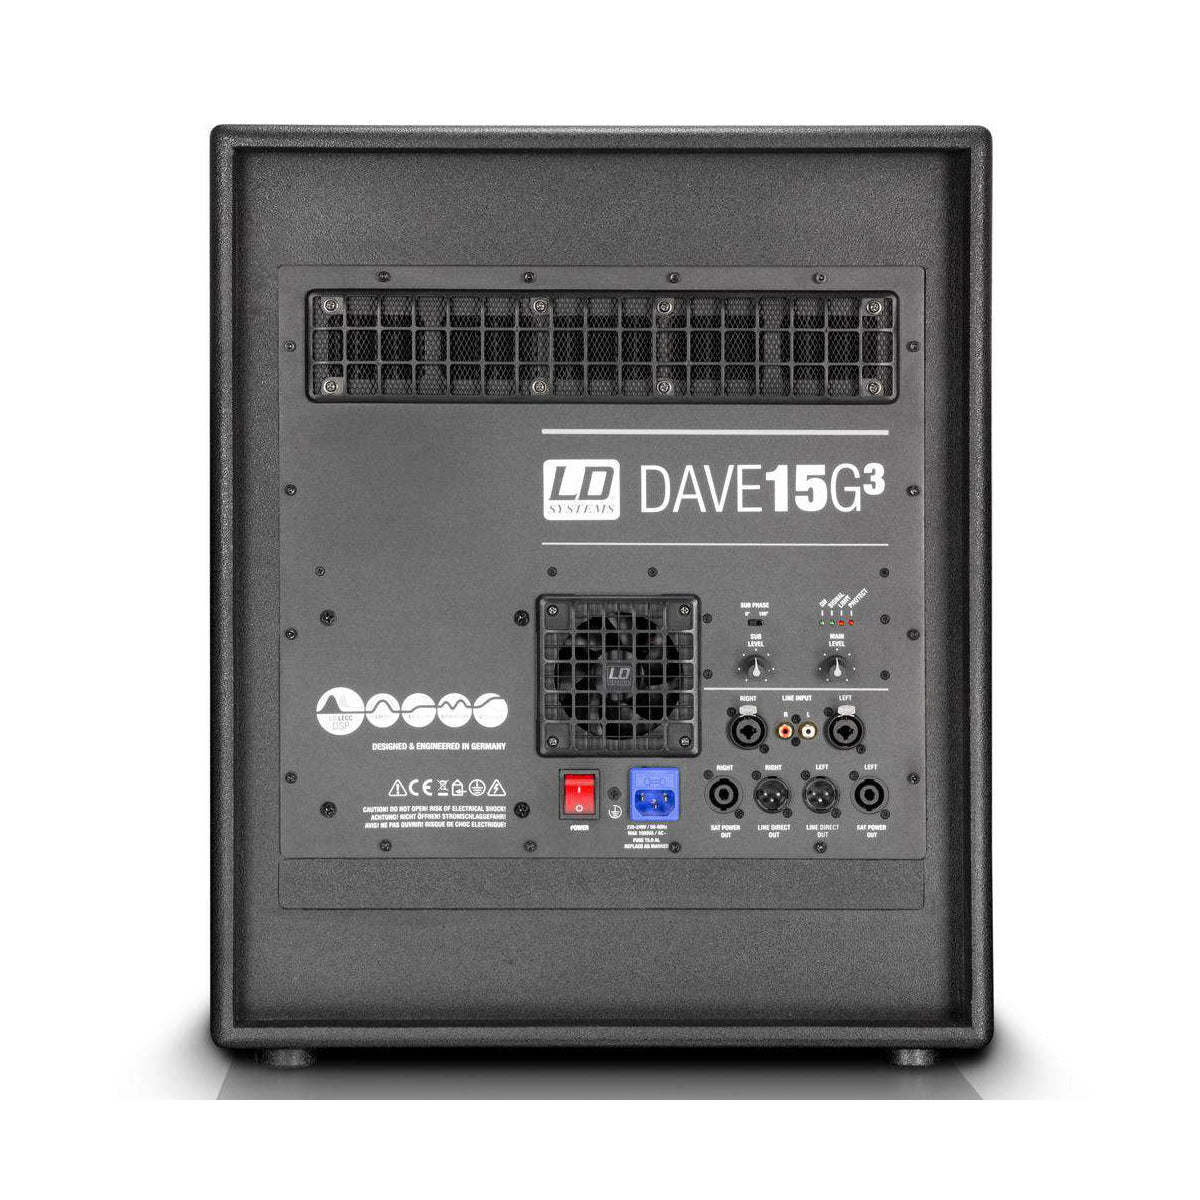 LD Systems LDDAVE15G3 Compact 15in Active PA System